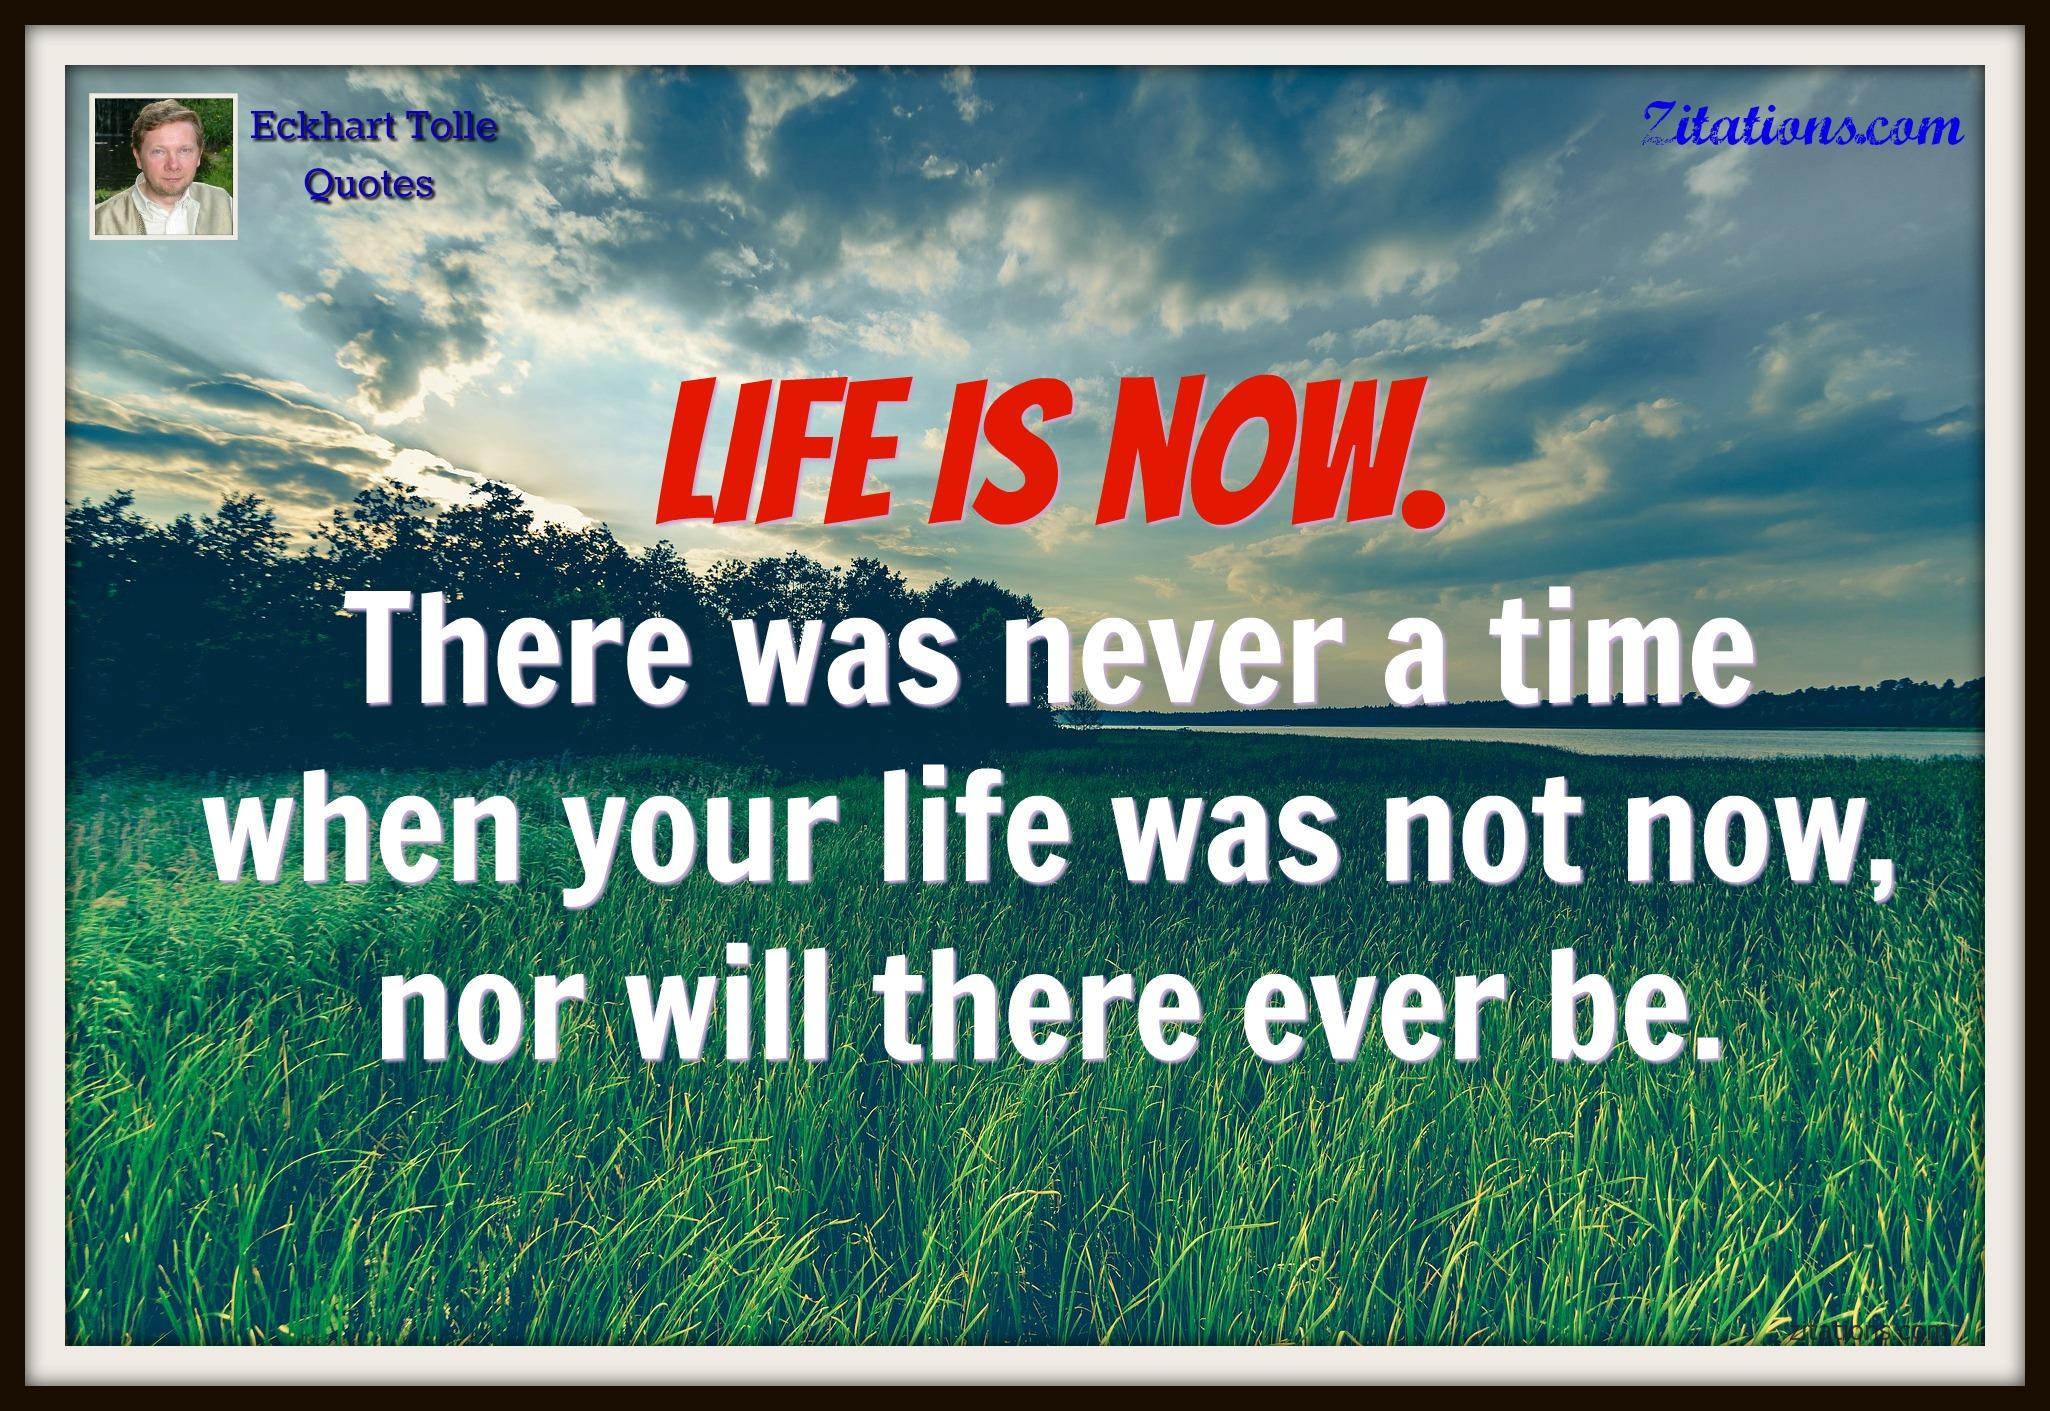 live life in the moment quotes - Eckhart Tolle Quotes